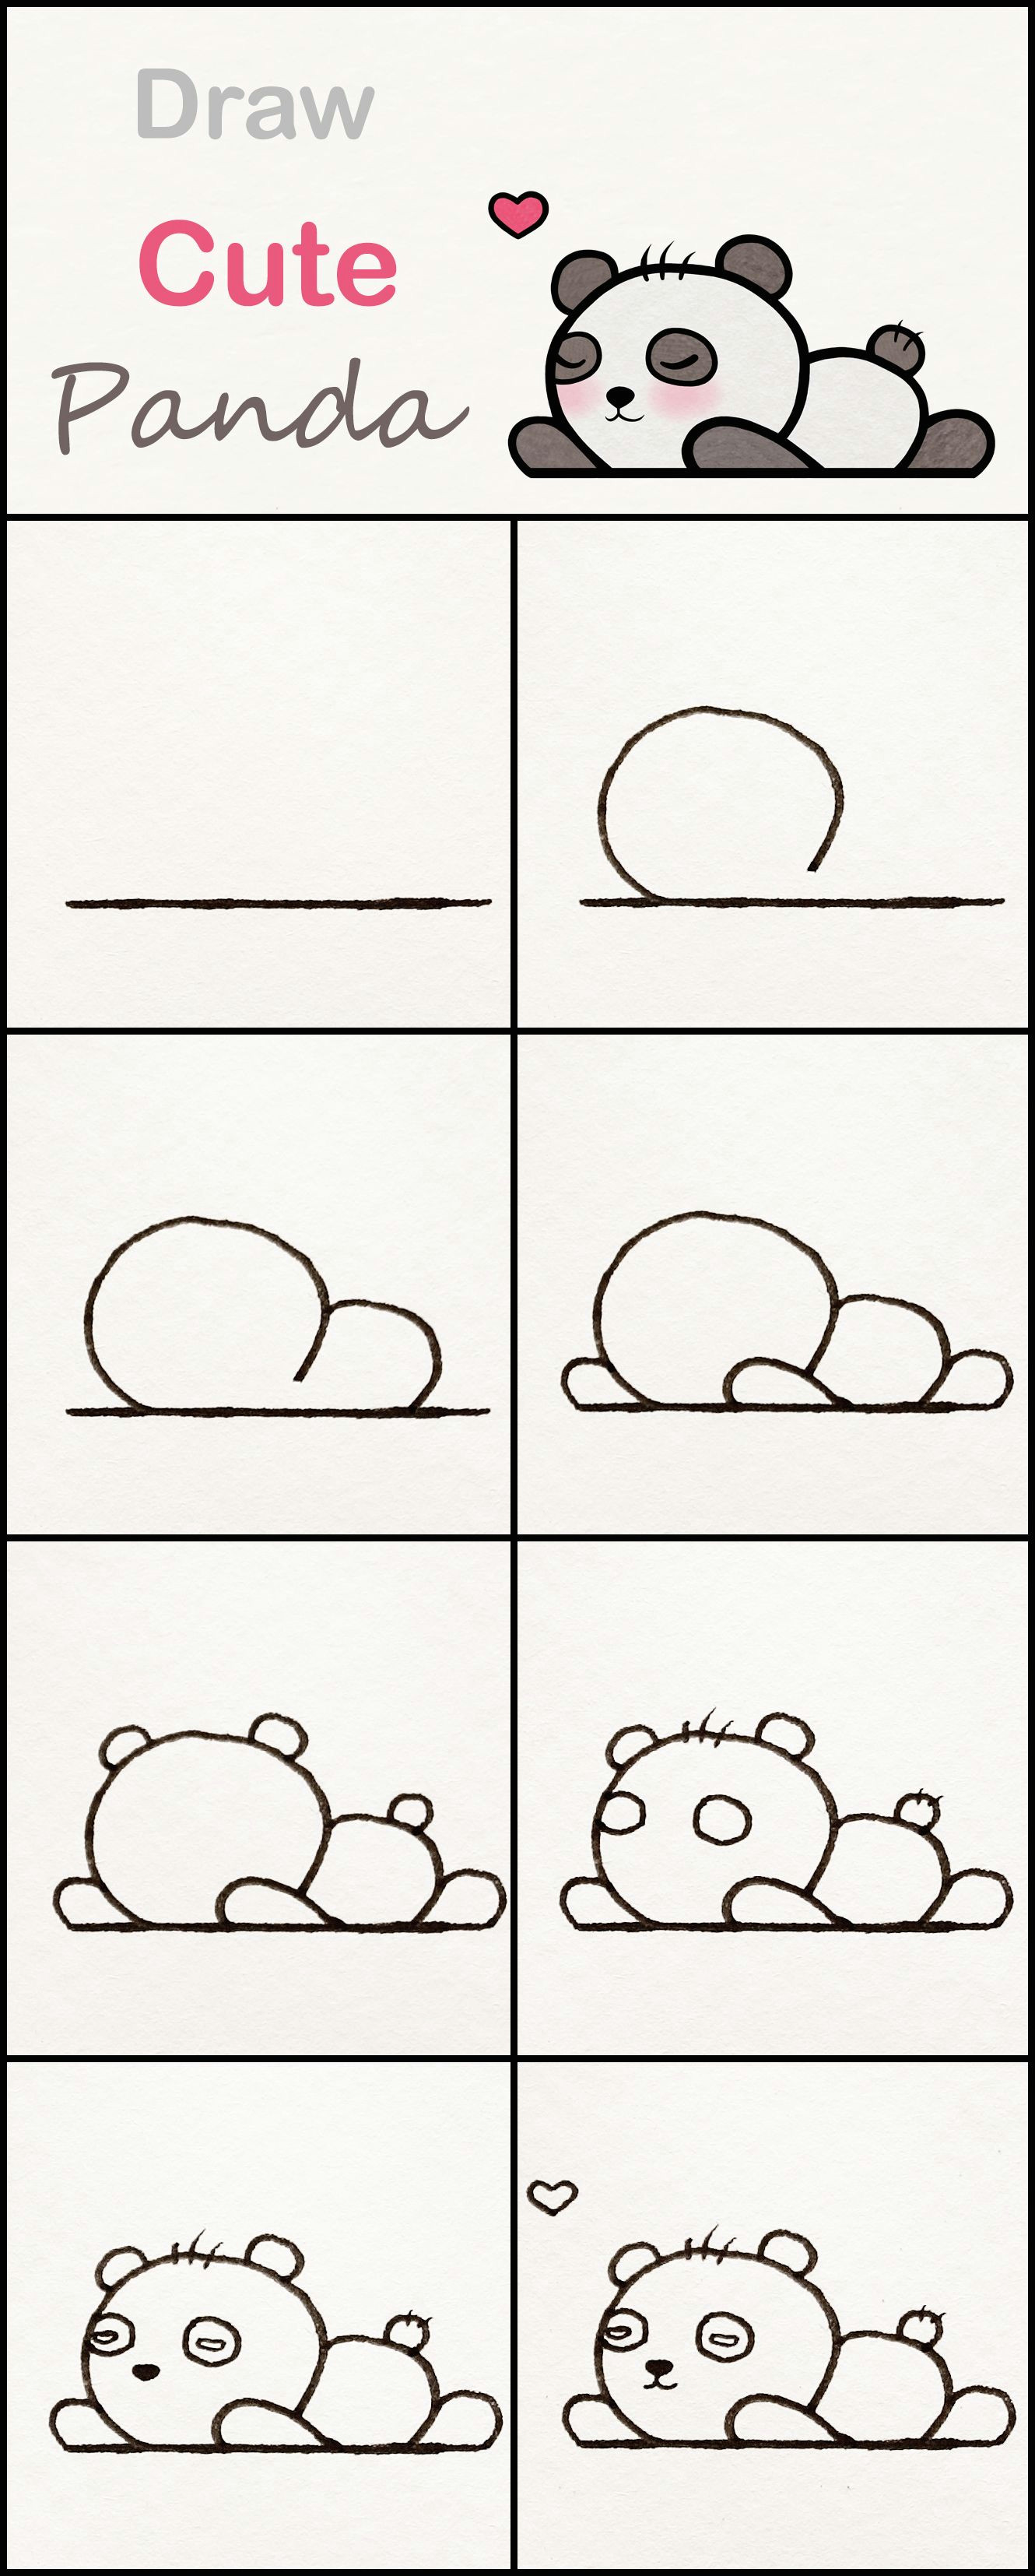 Drawing Cute Animals Step by Step Learn How to Draw A Cute Baby Panda Step by Step A Very Simple